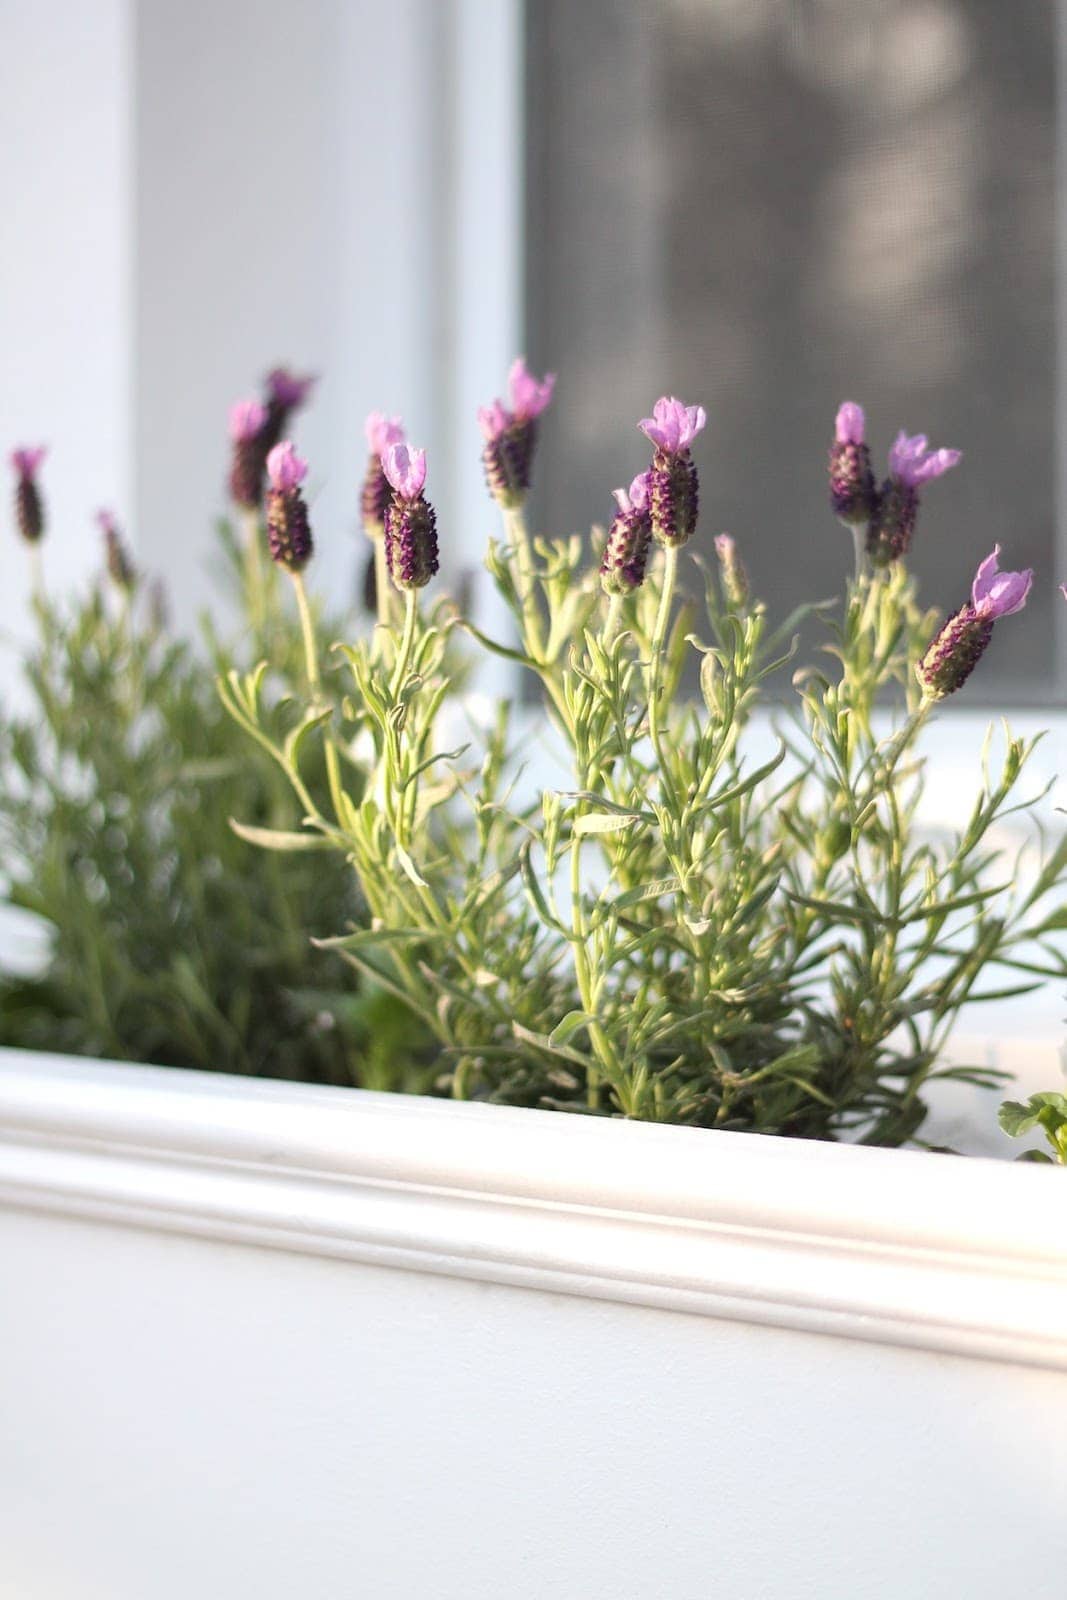 A homemade white window box filled with blooming lavender.